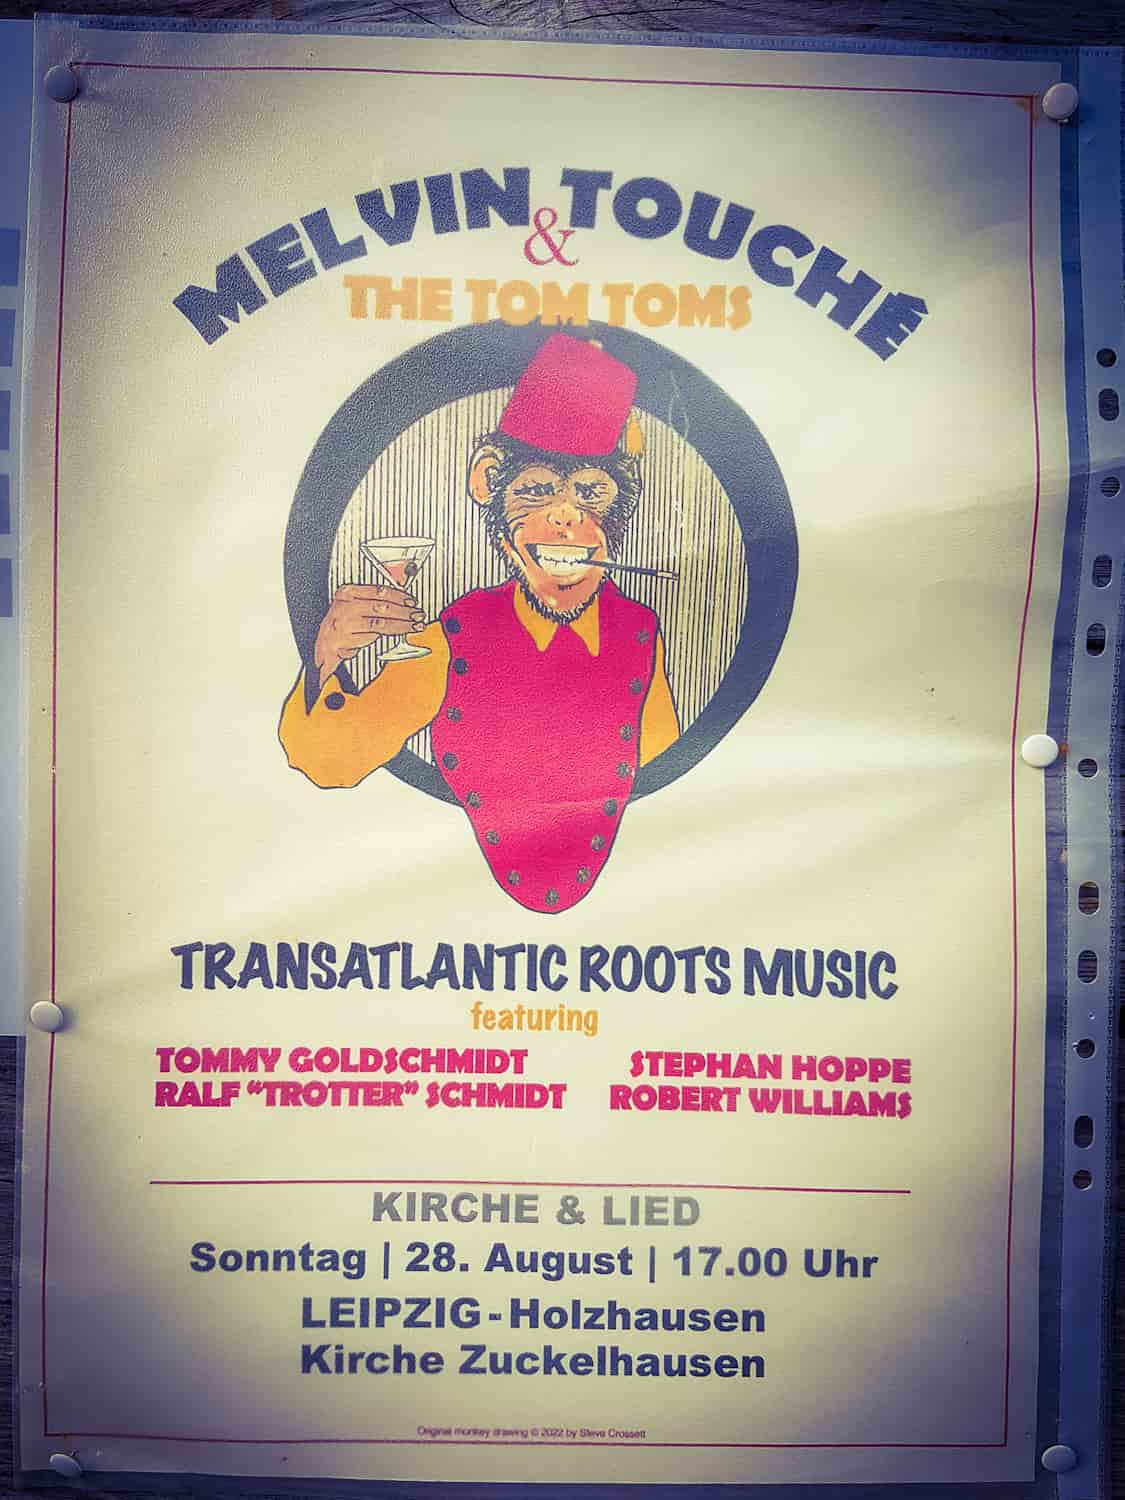 Kirche & Lied, 28. August: Melvin Touché and The Tom Toms